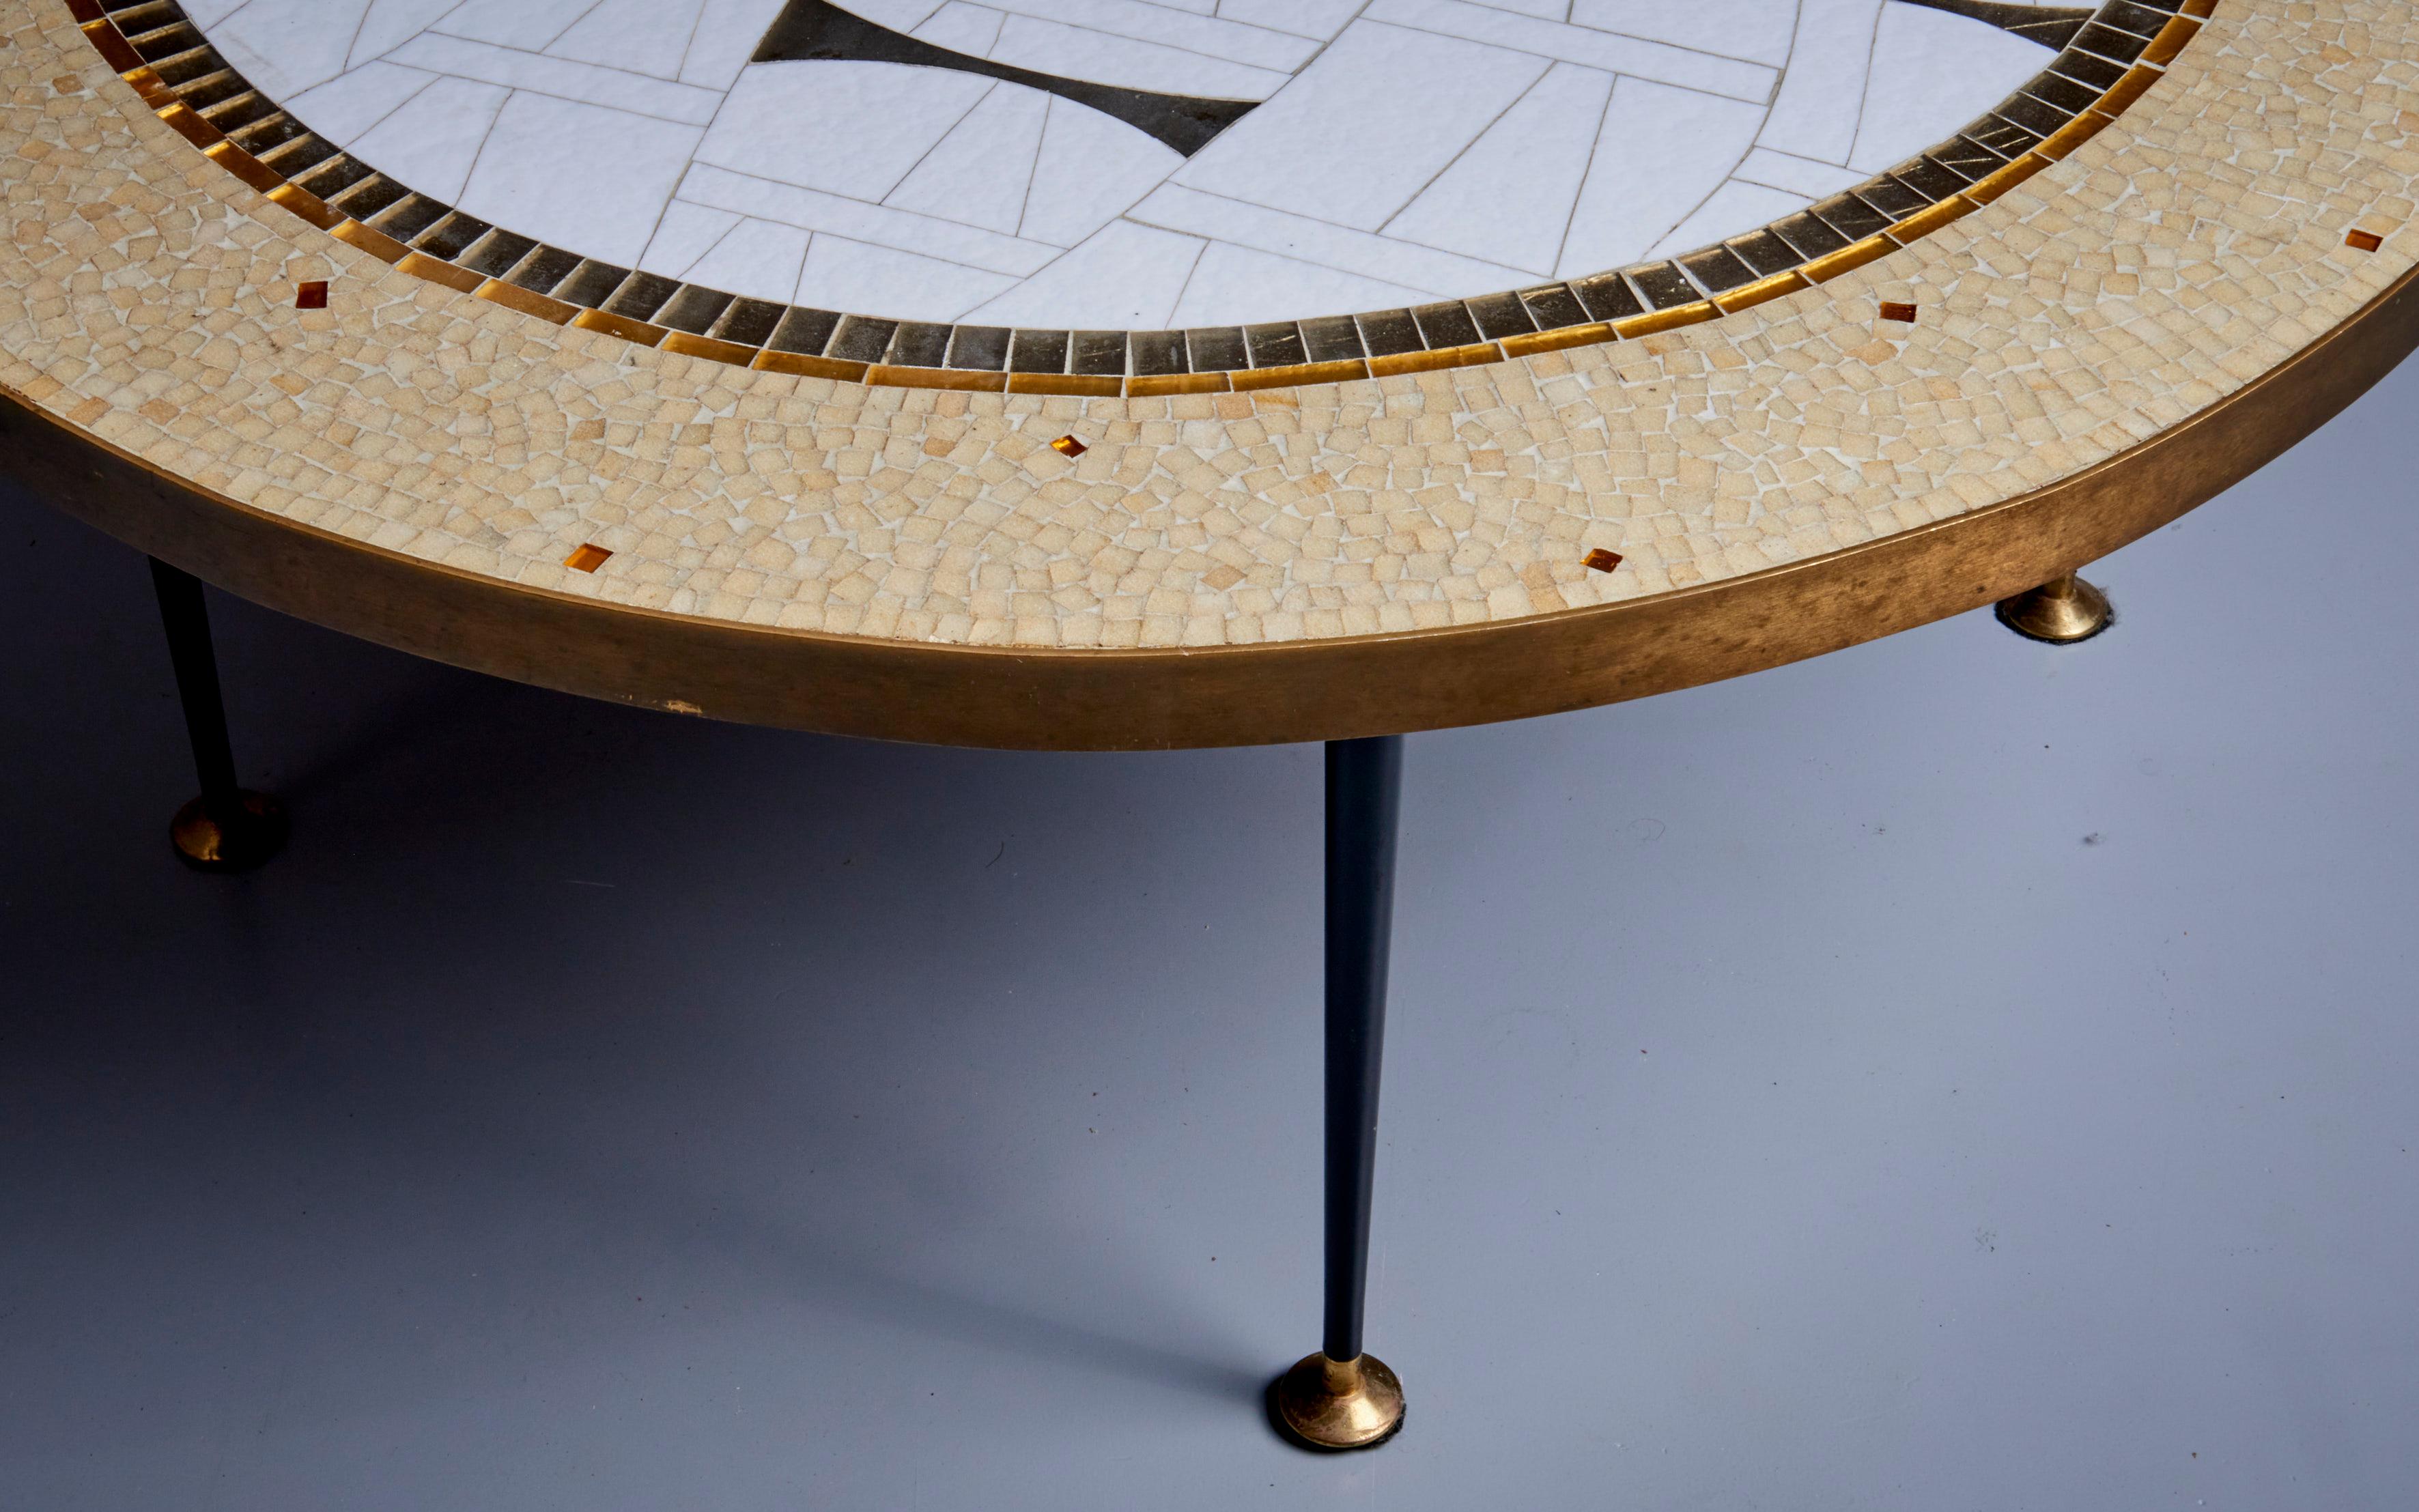 Round mosaic top coffee table with a brass band around it on four legs, by Berthold Müller. The top has an abstract composition and the brass has a lovely patina. Berthold Müller-Oerlinghausen (1893-1979) was a German sculptor who specialized in